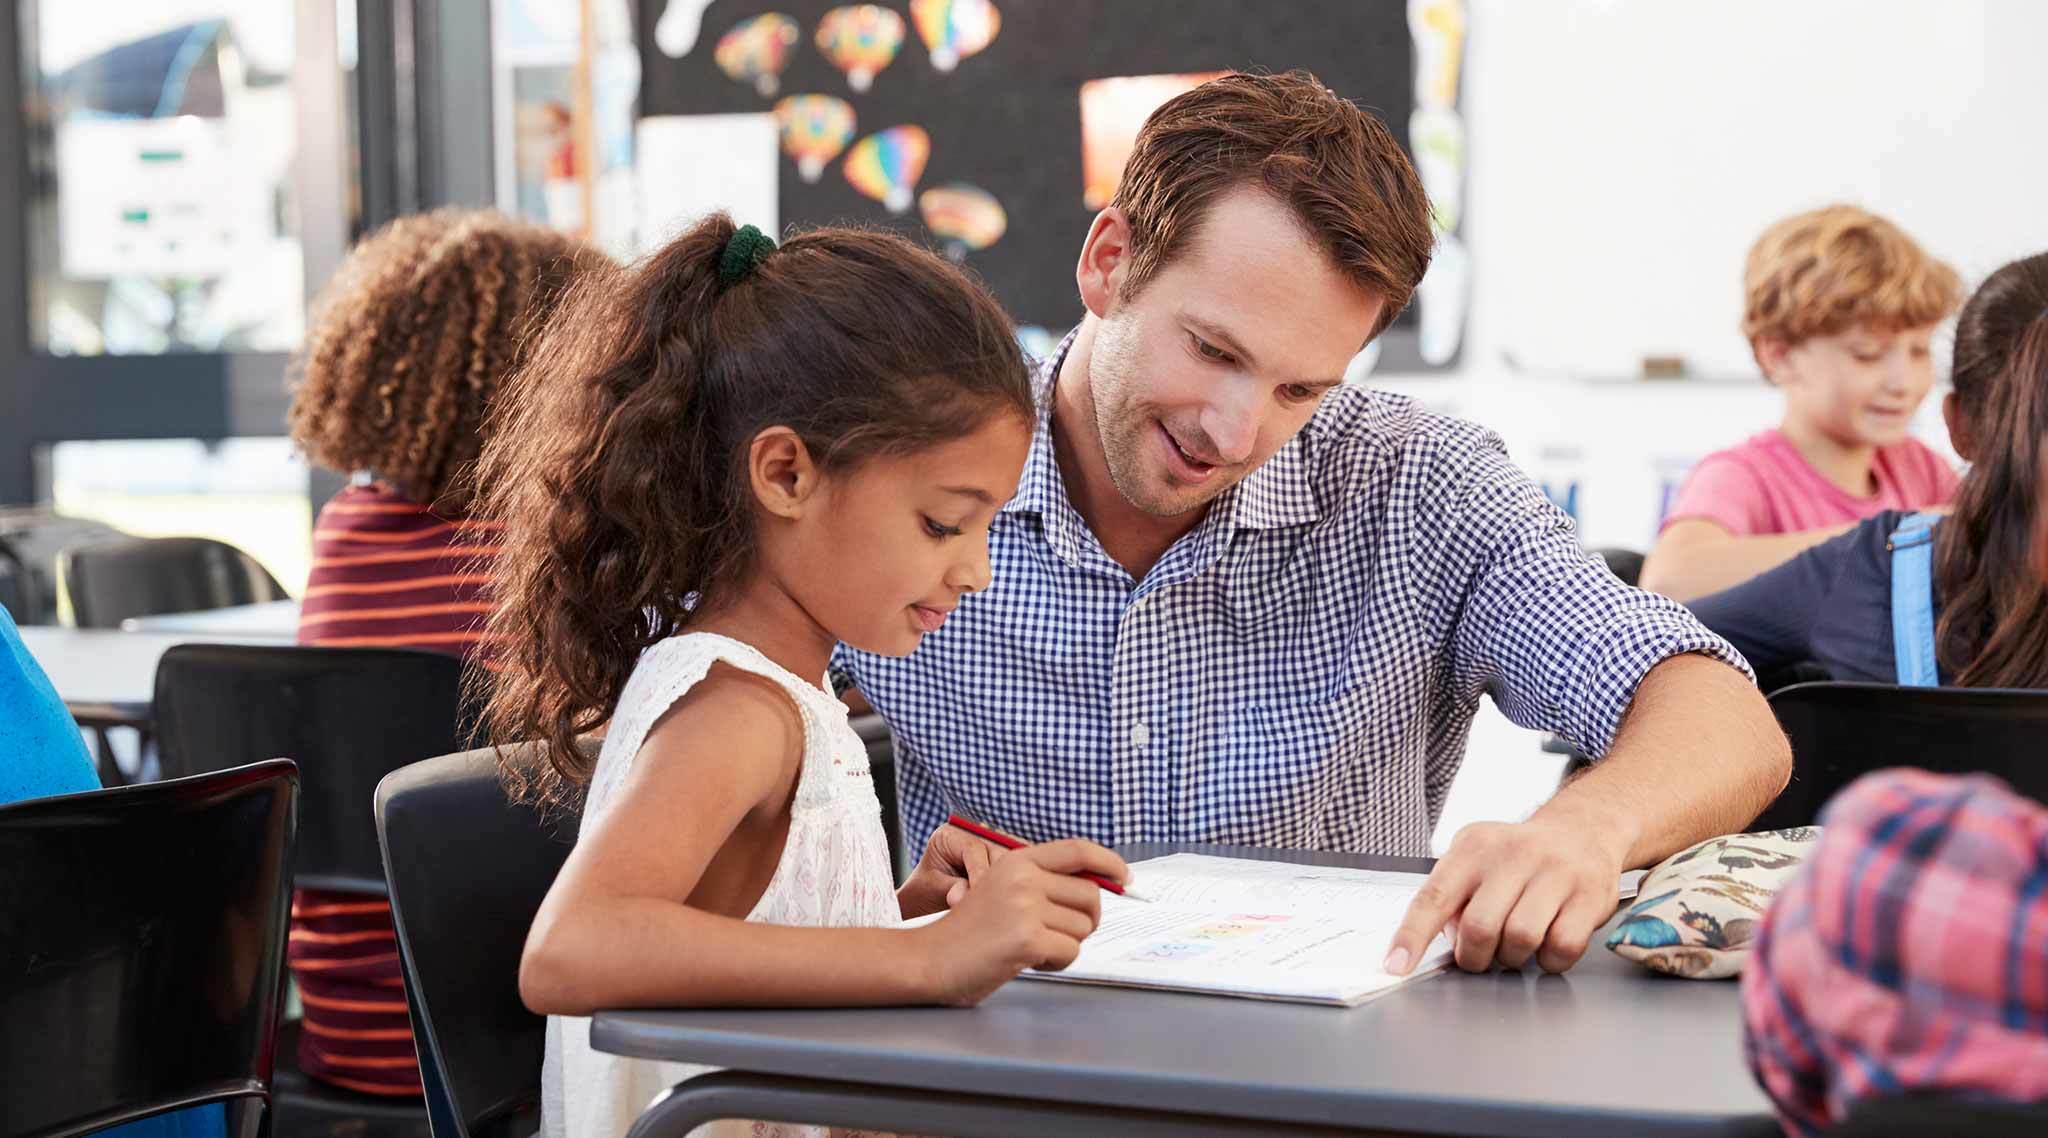 Teaching point to a notebook with a child at a desk in a classroom setting.